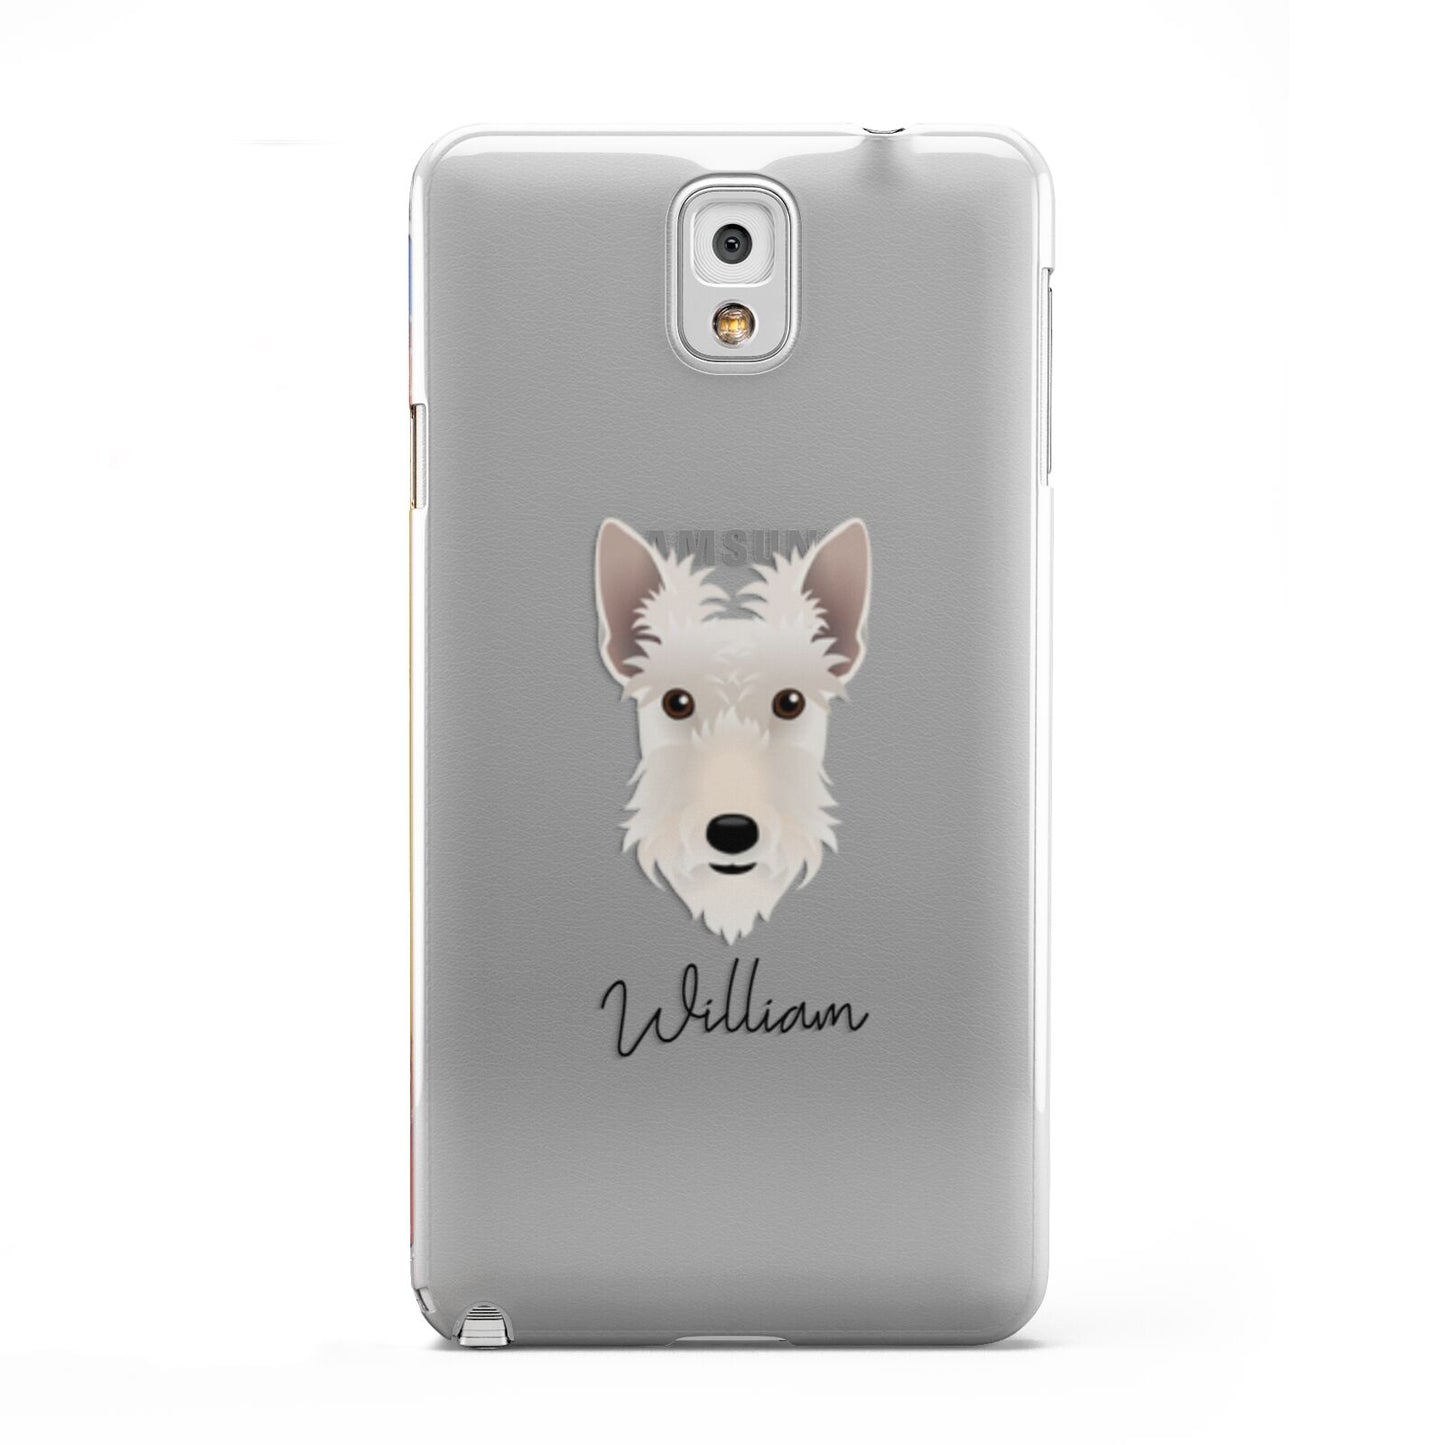 Scottish Terrier Personalised Samsung Galaxy Note 3 Case